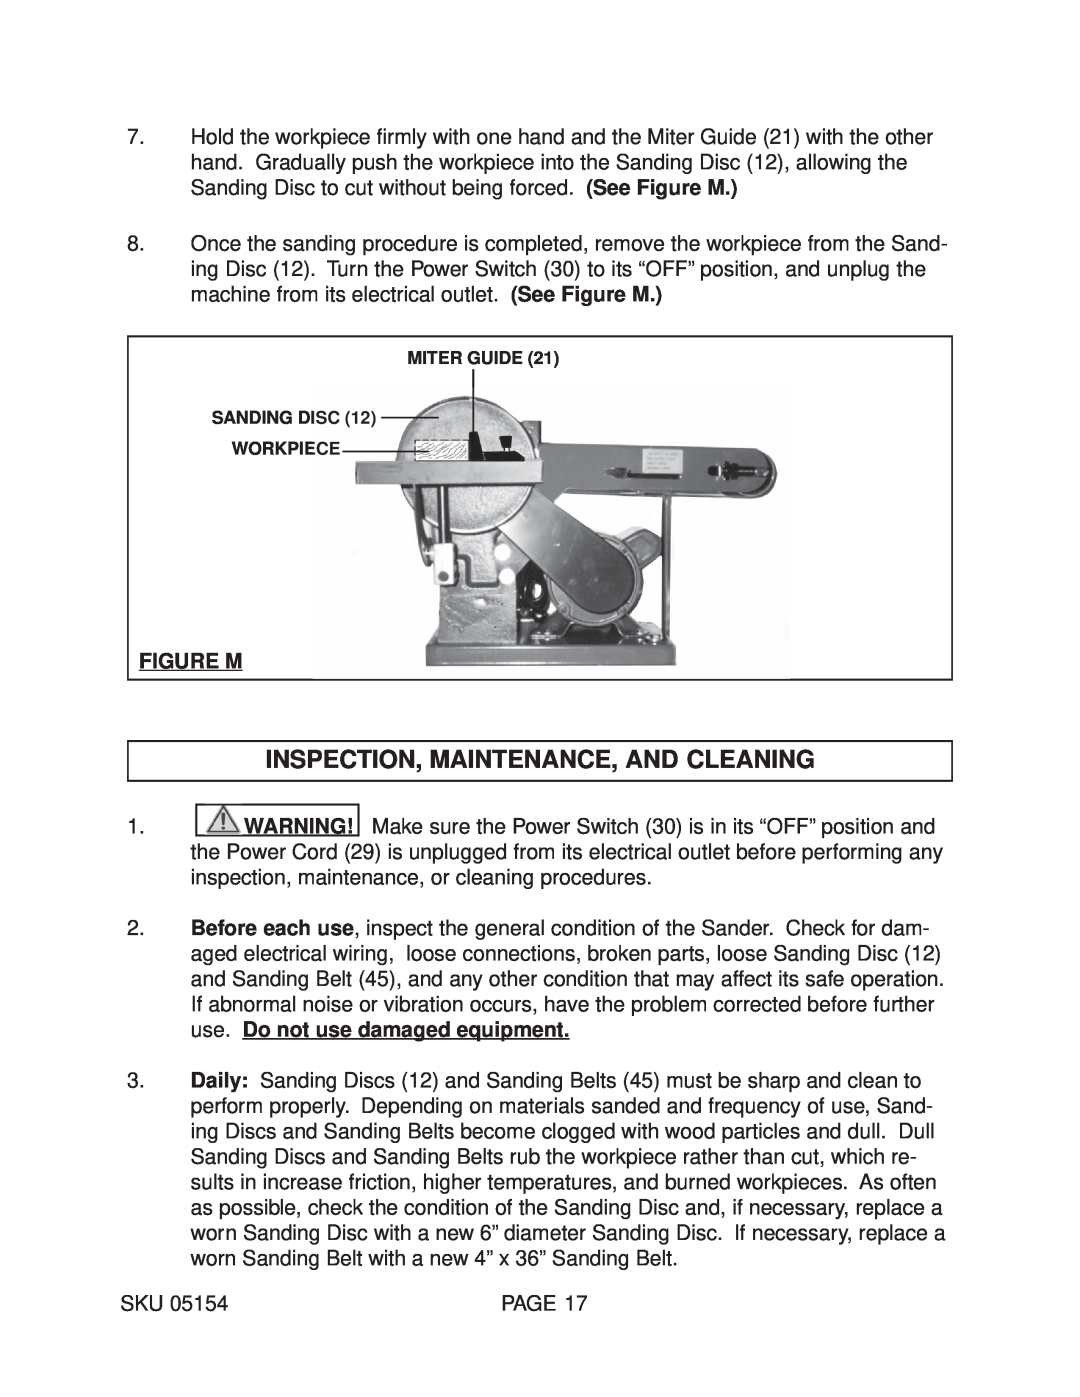 Harbor Freight Tools 05154 operating instructions Inspection, Maintenance, And Cleaning, Figure M 